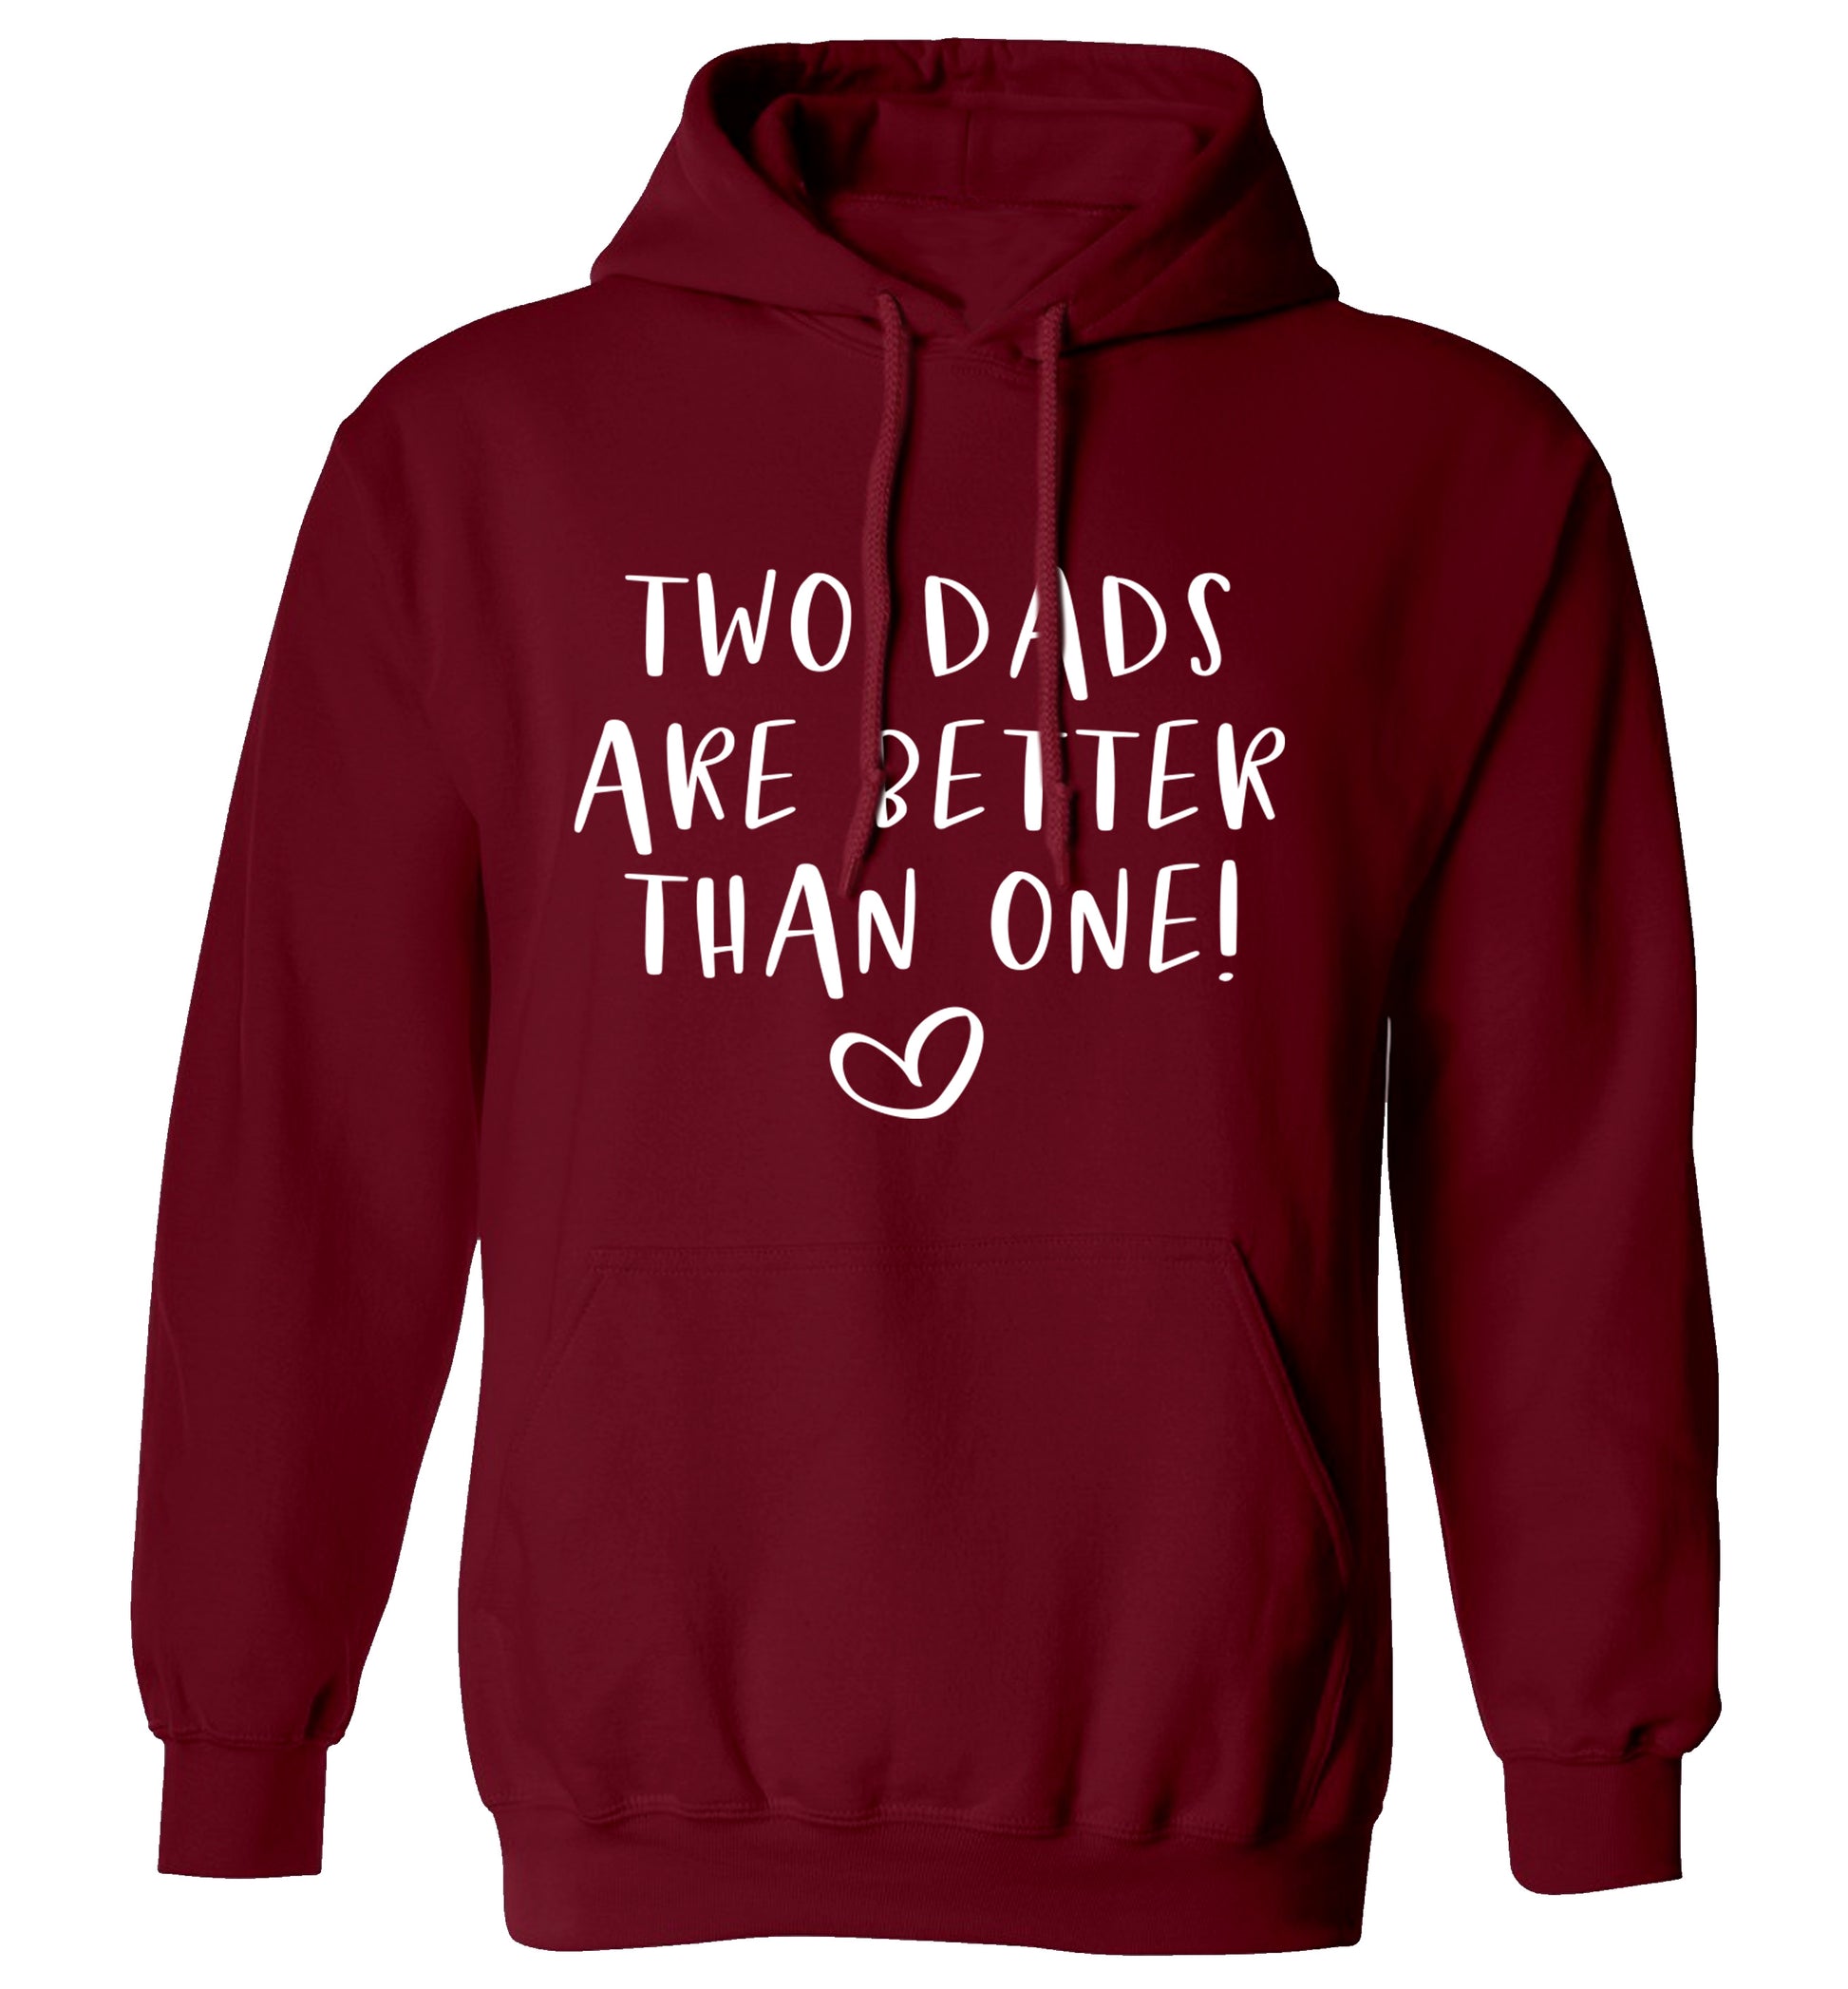 Two dads are better than one adults unisex maroon hoodie 2XL